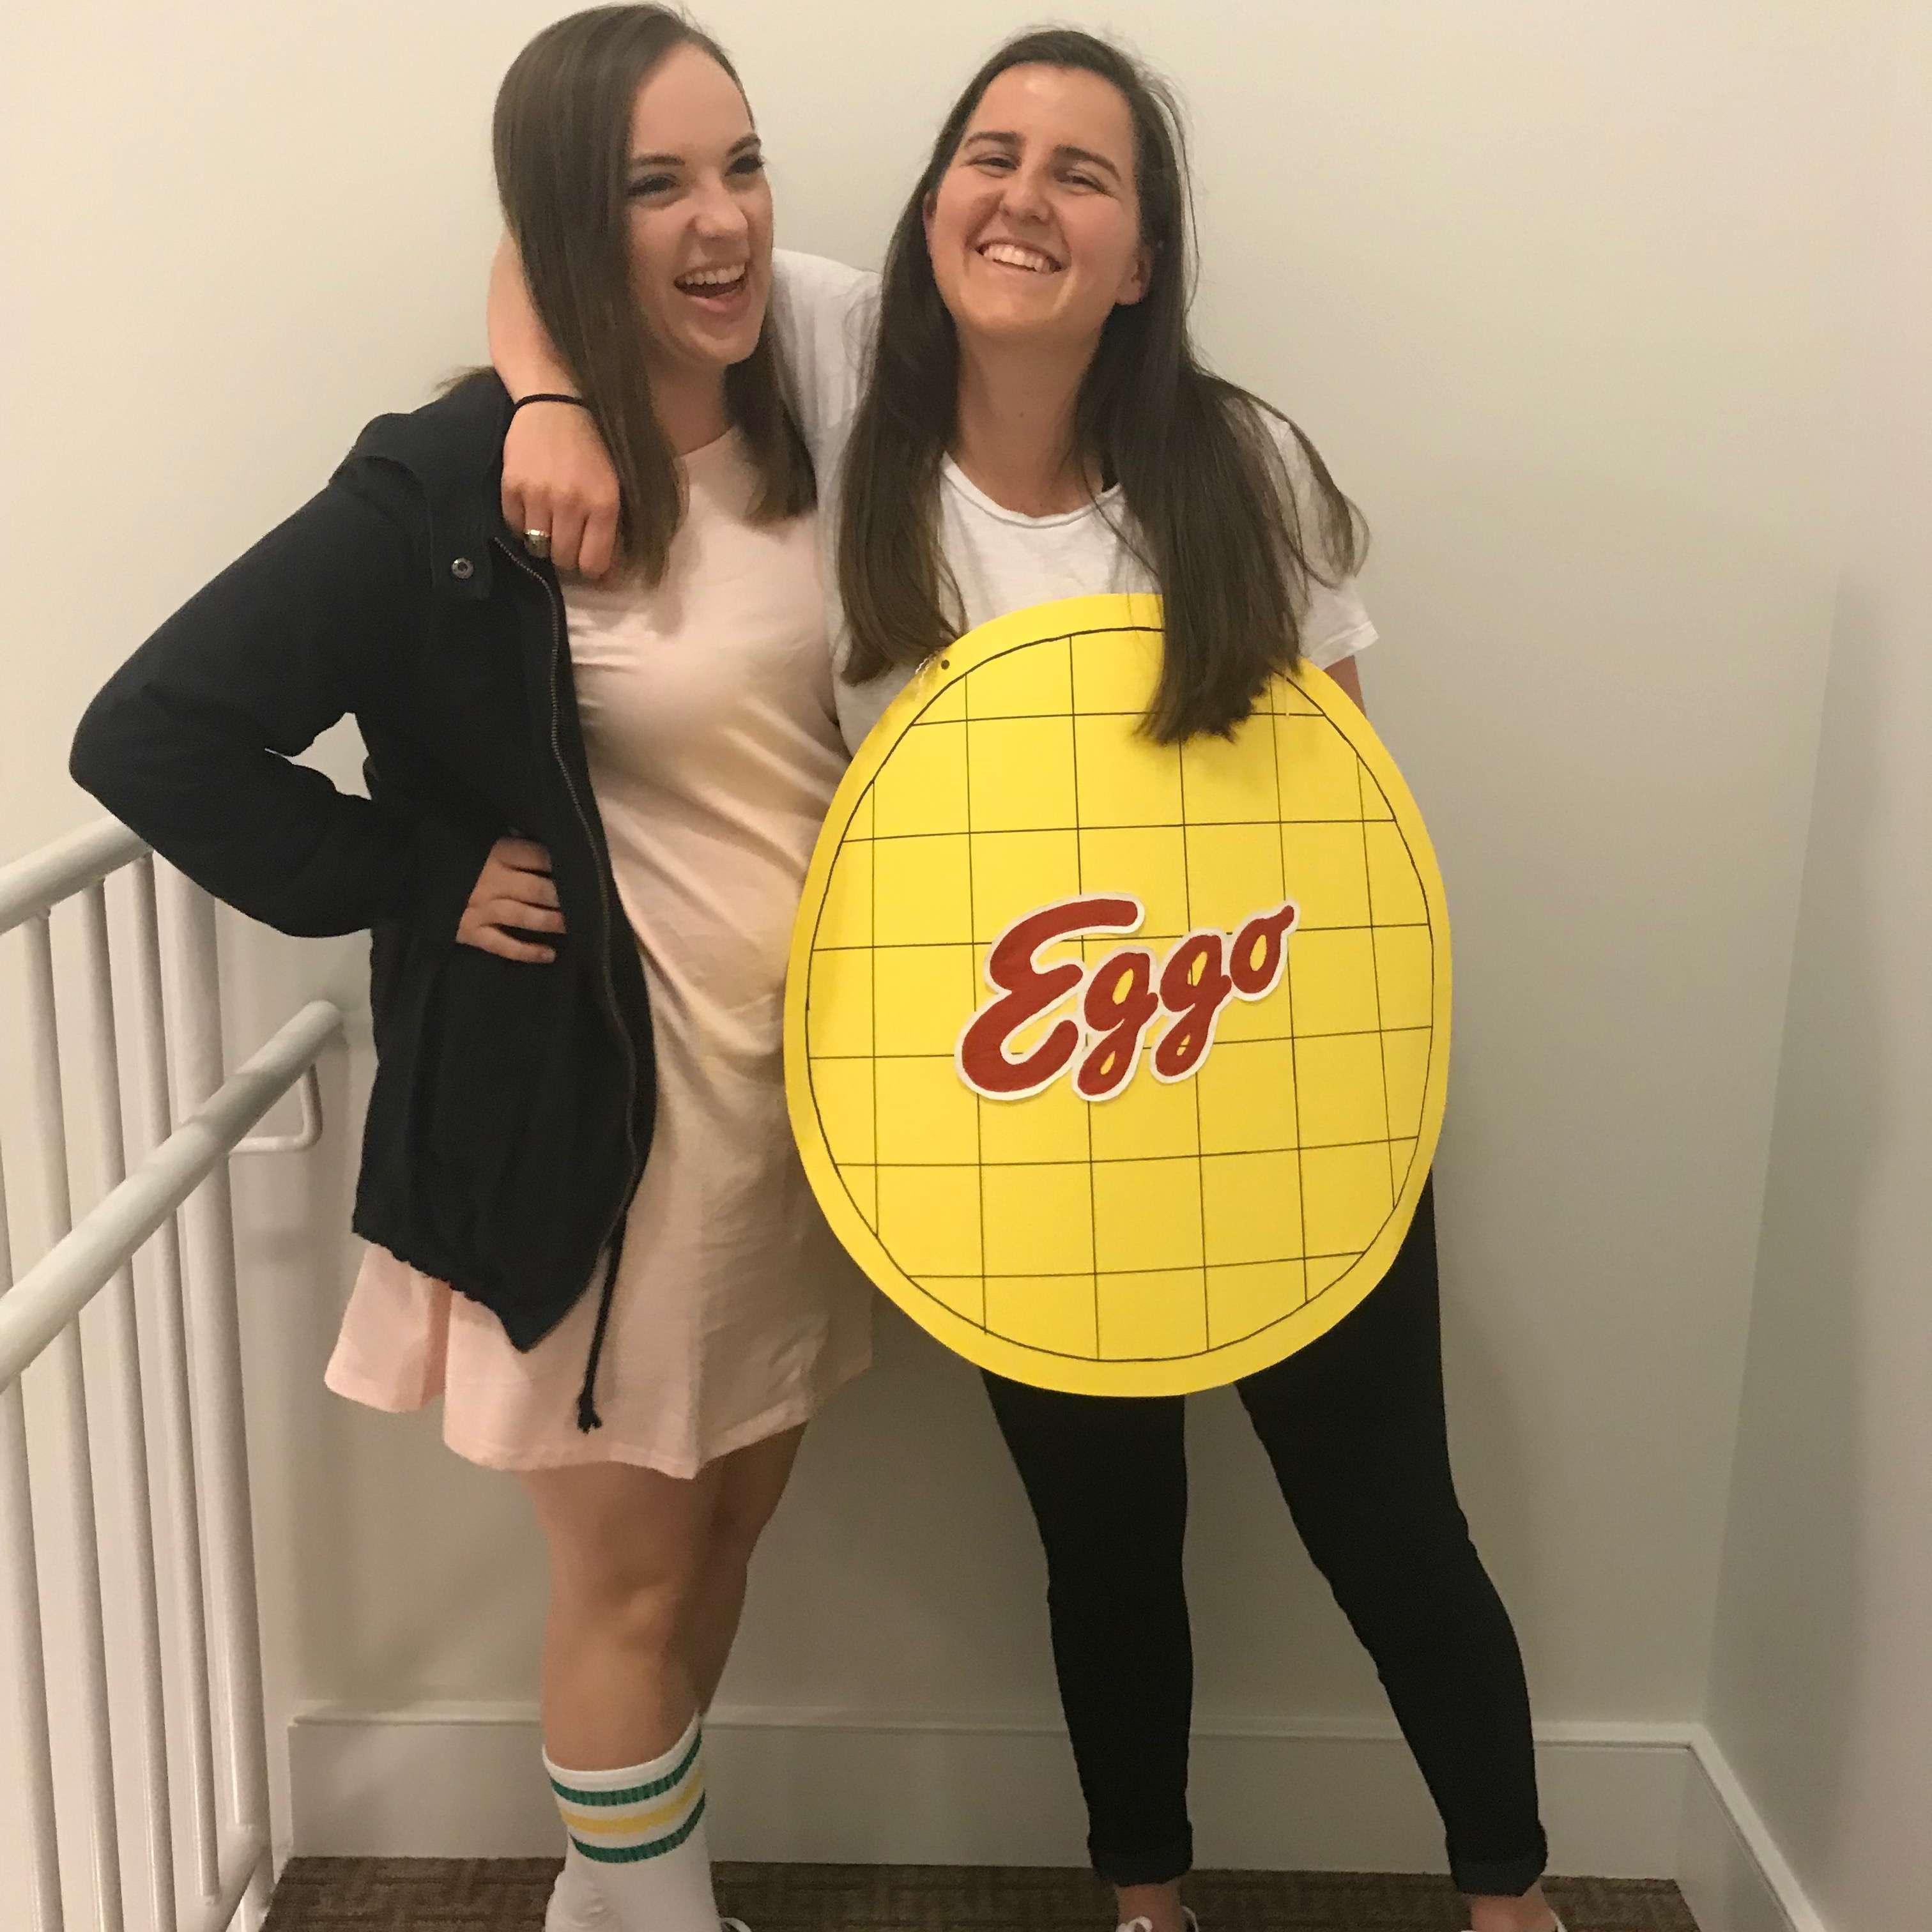 Our first couple costume: Halloween 2017 - Eleven from Stranger Things, and her favorite snack Eggos!